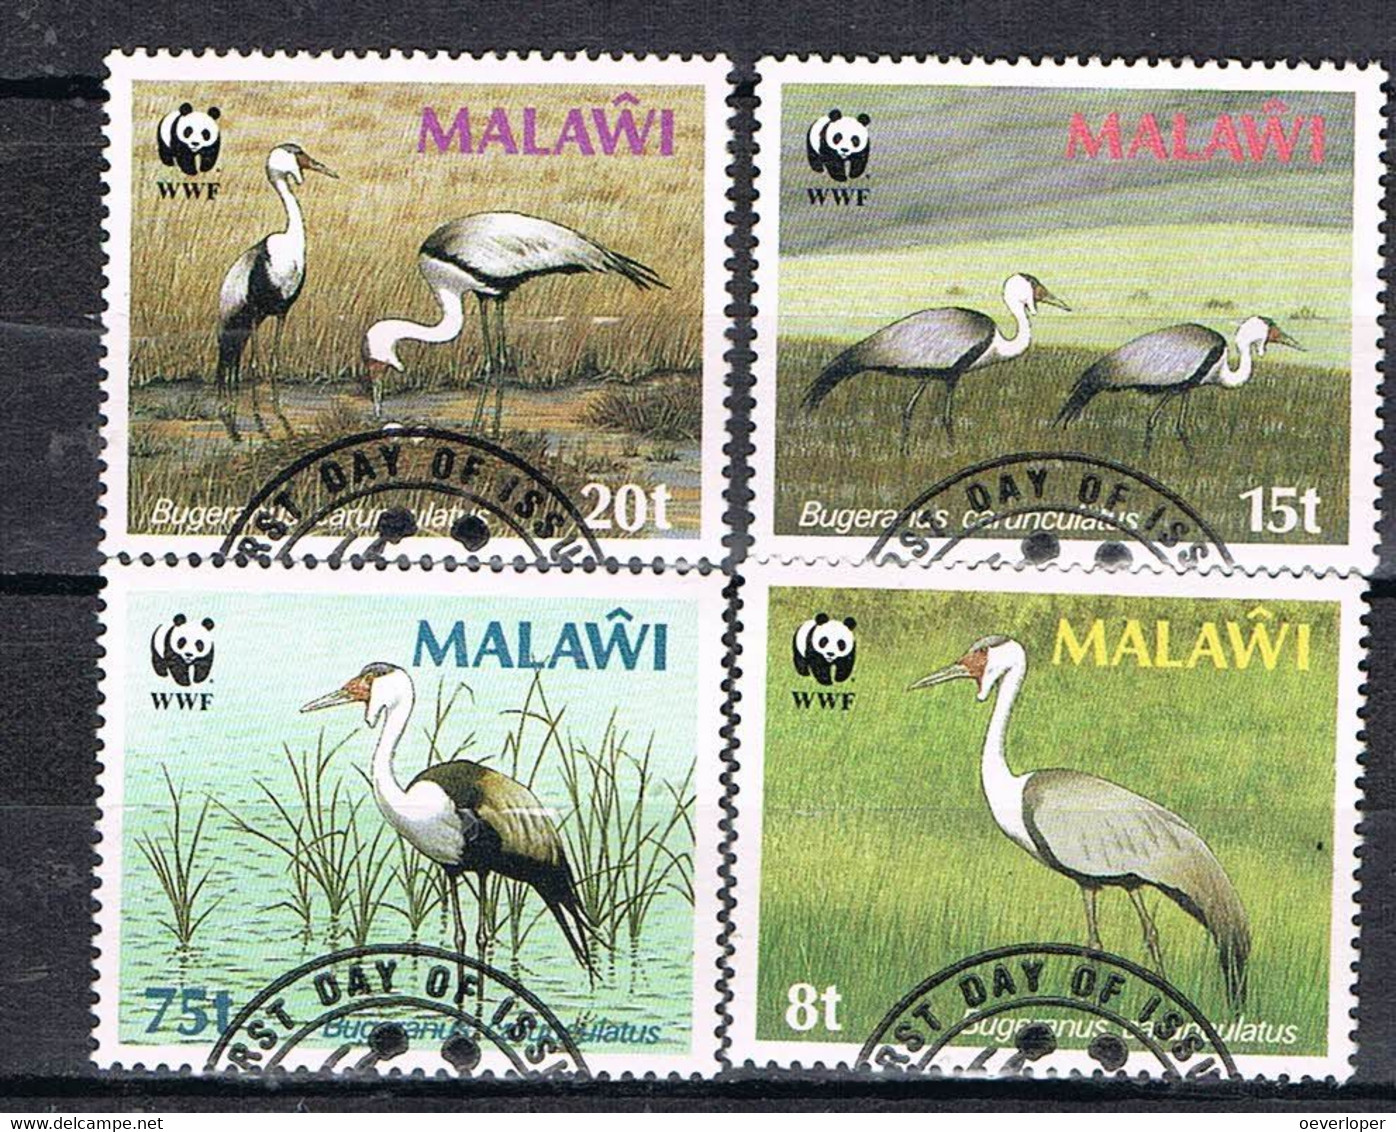 Malawi Cranes 1987 WWF Used - Used Stamps